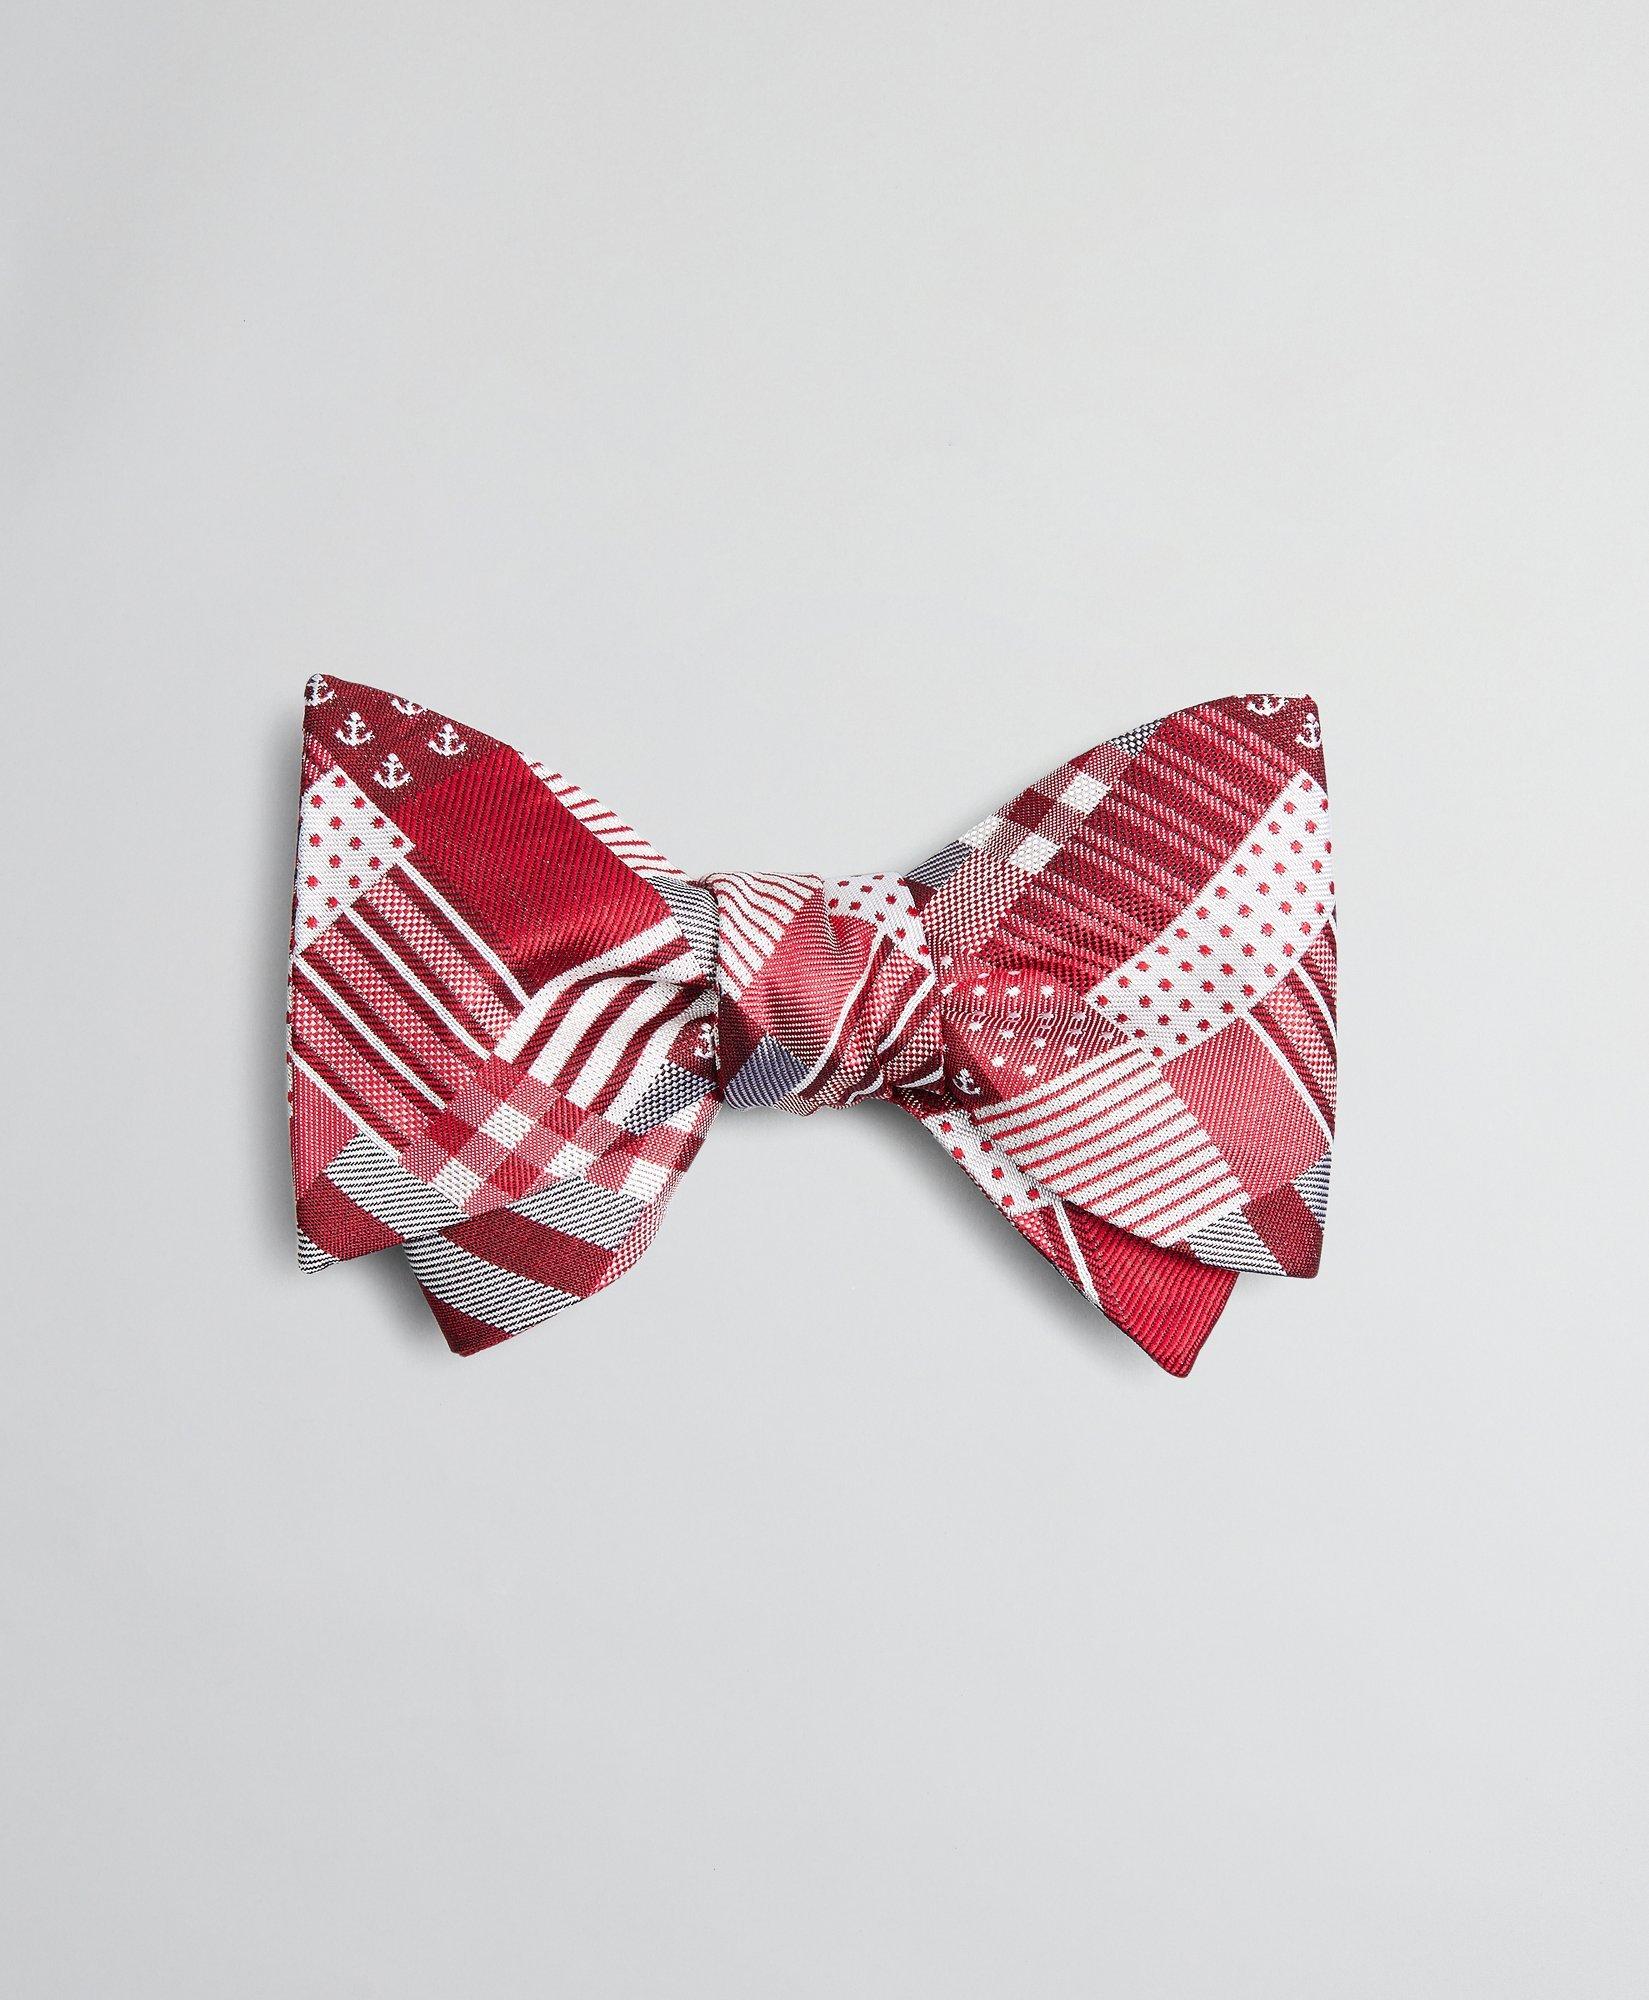 Fun Patchwork Bow Tie, image 1